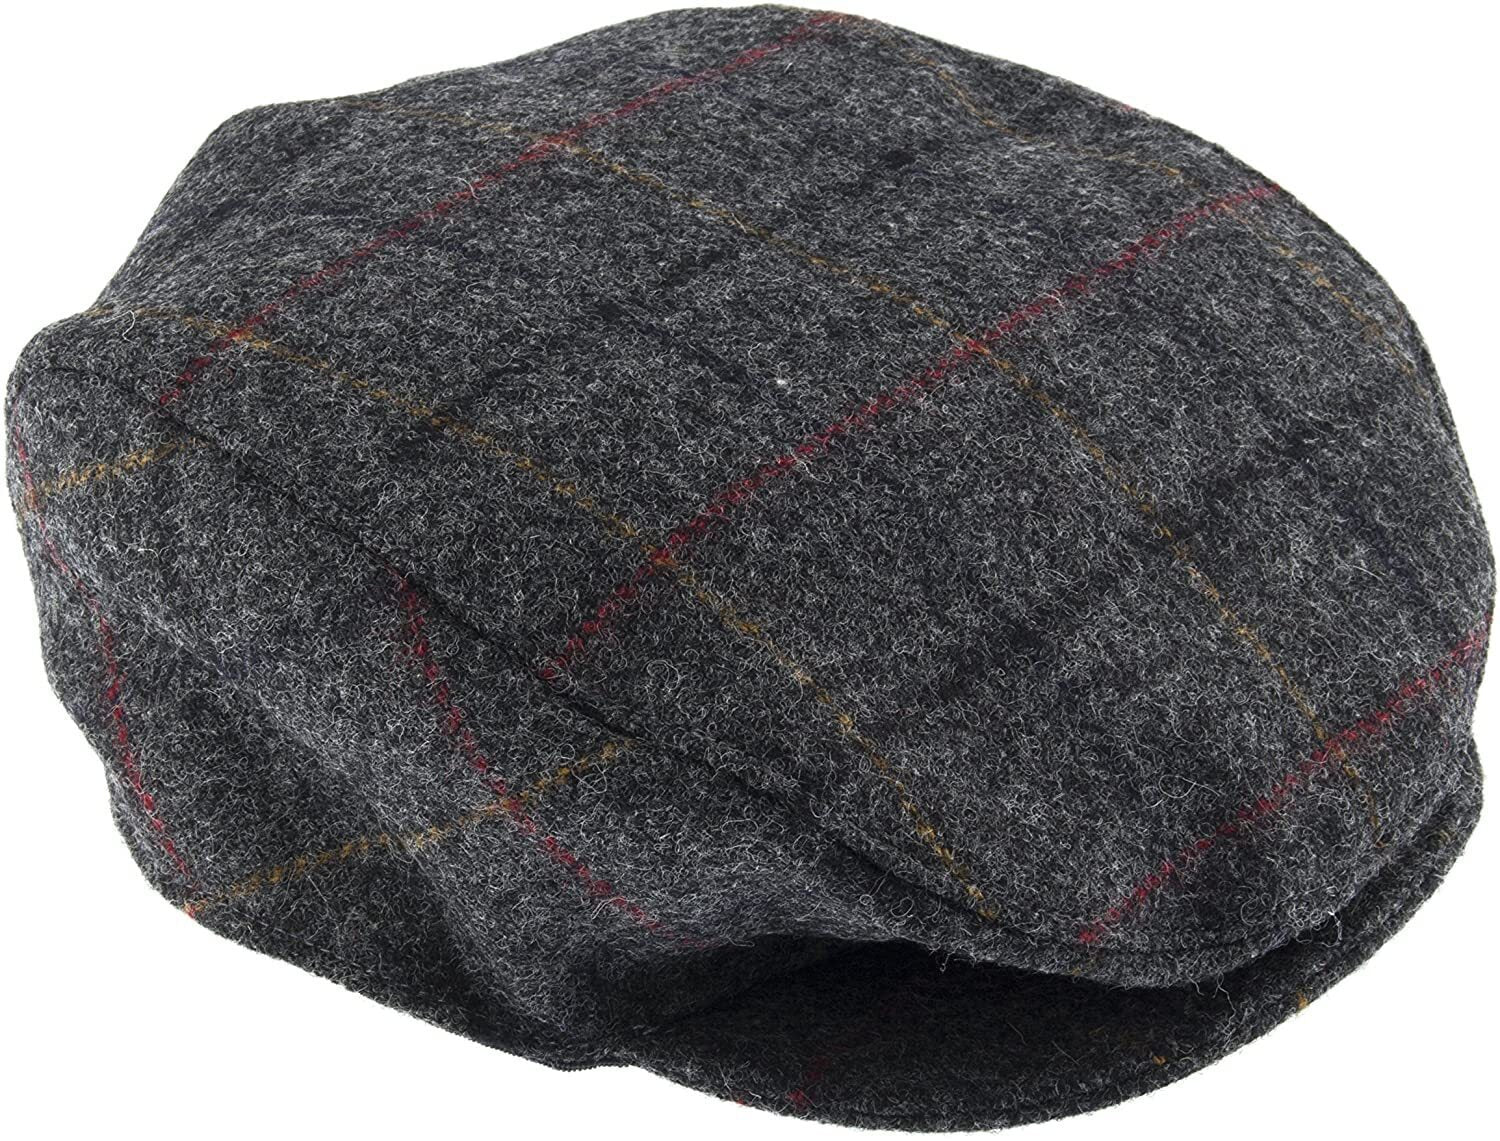 Abraham Moon Tweed Flat Cap Wool Ivy Hat Driving Cabbie Quilted 1-3038 - Charcoal - Large